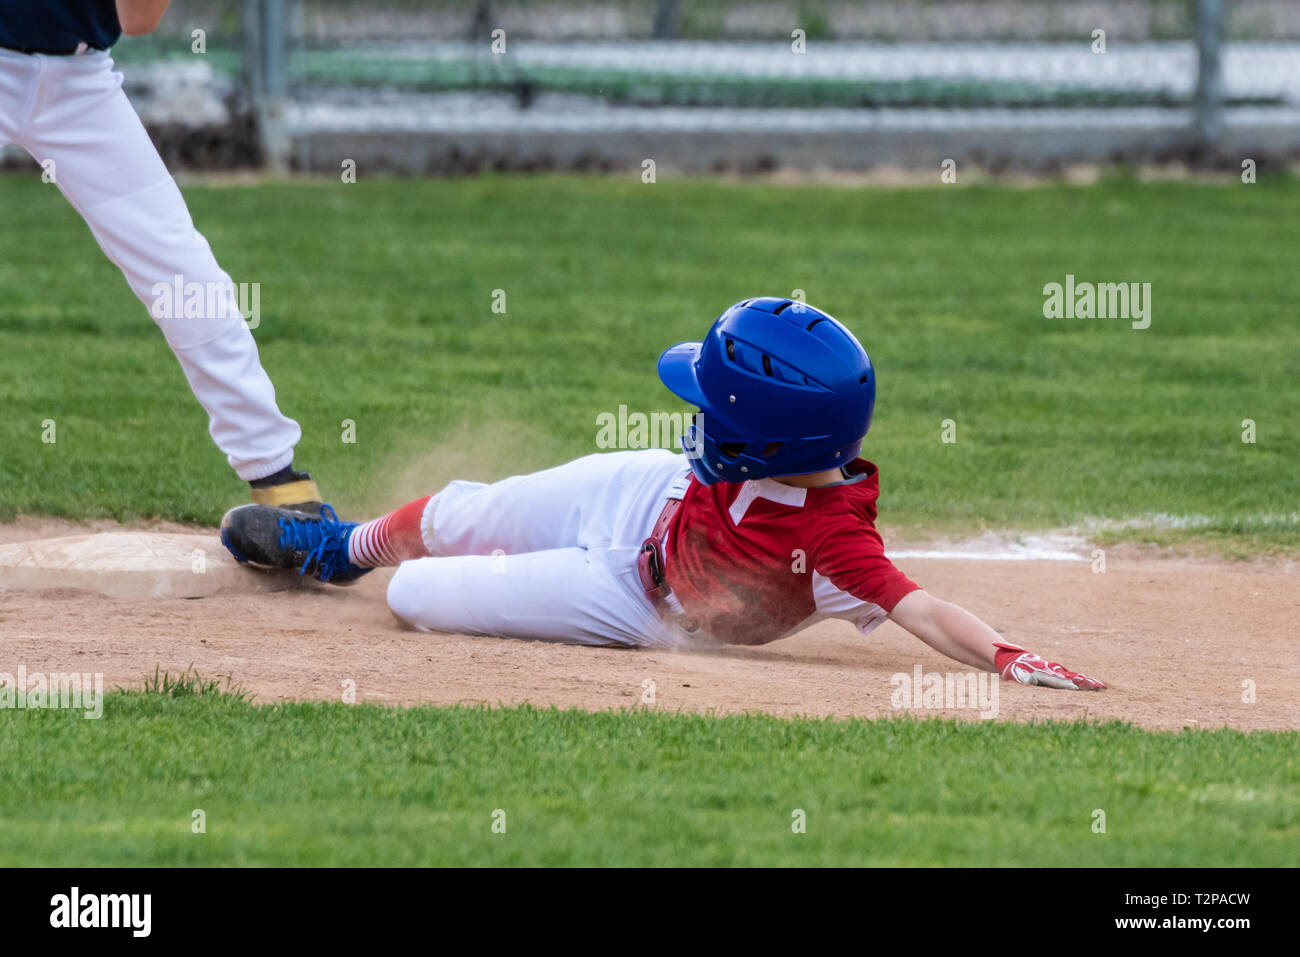 Youth baseball player in red uniform sliding safely into third base in a cloud of dust during a game. Stock Photo